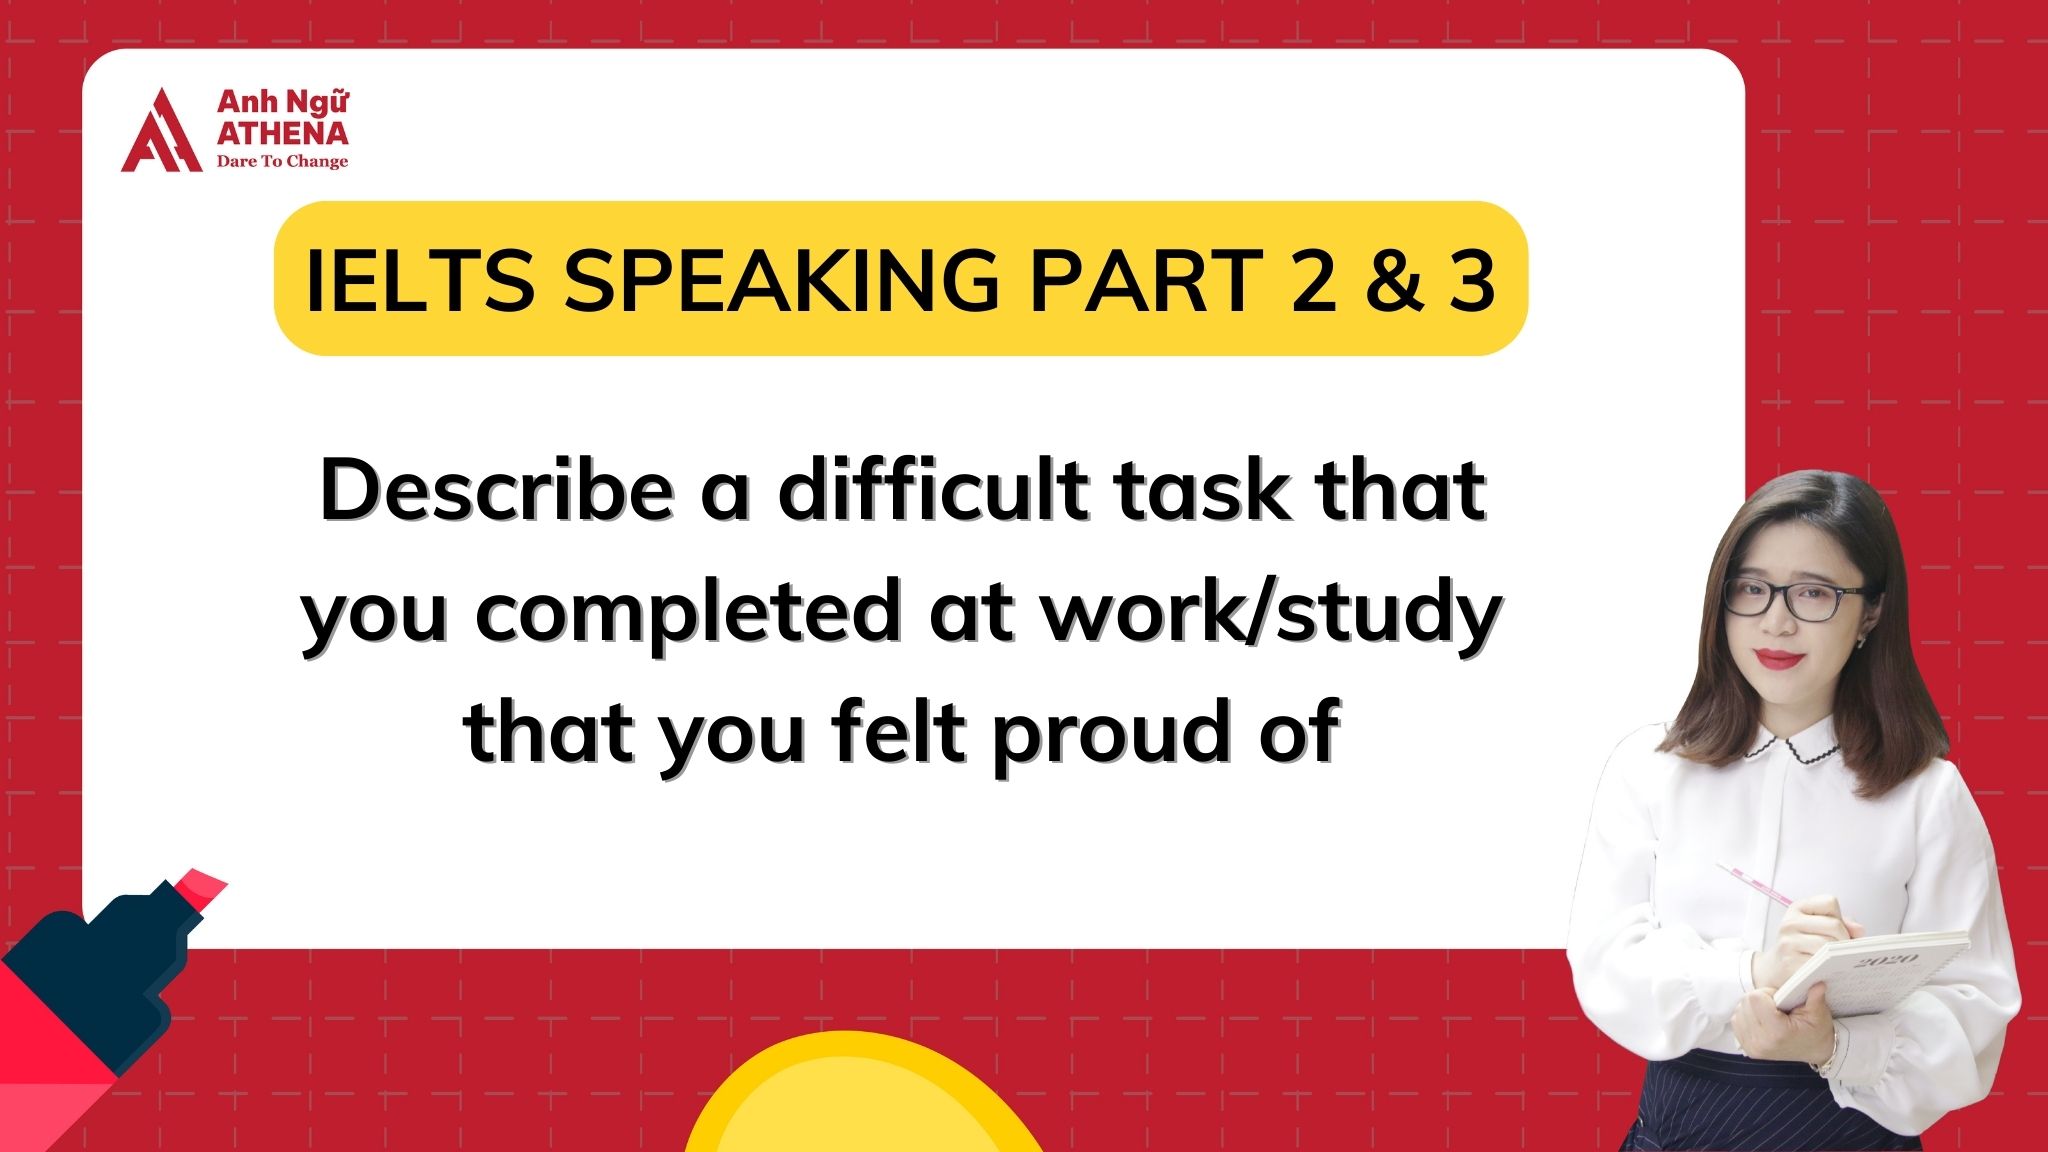 BÀI MẪU IELTS SPEAKING PART 2 & 3 - TOPIC: Describe a difficult task that you completed at work/study that you felt proud of 